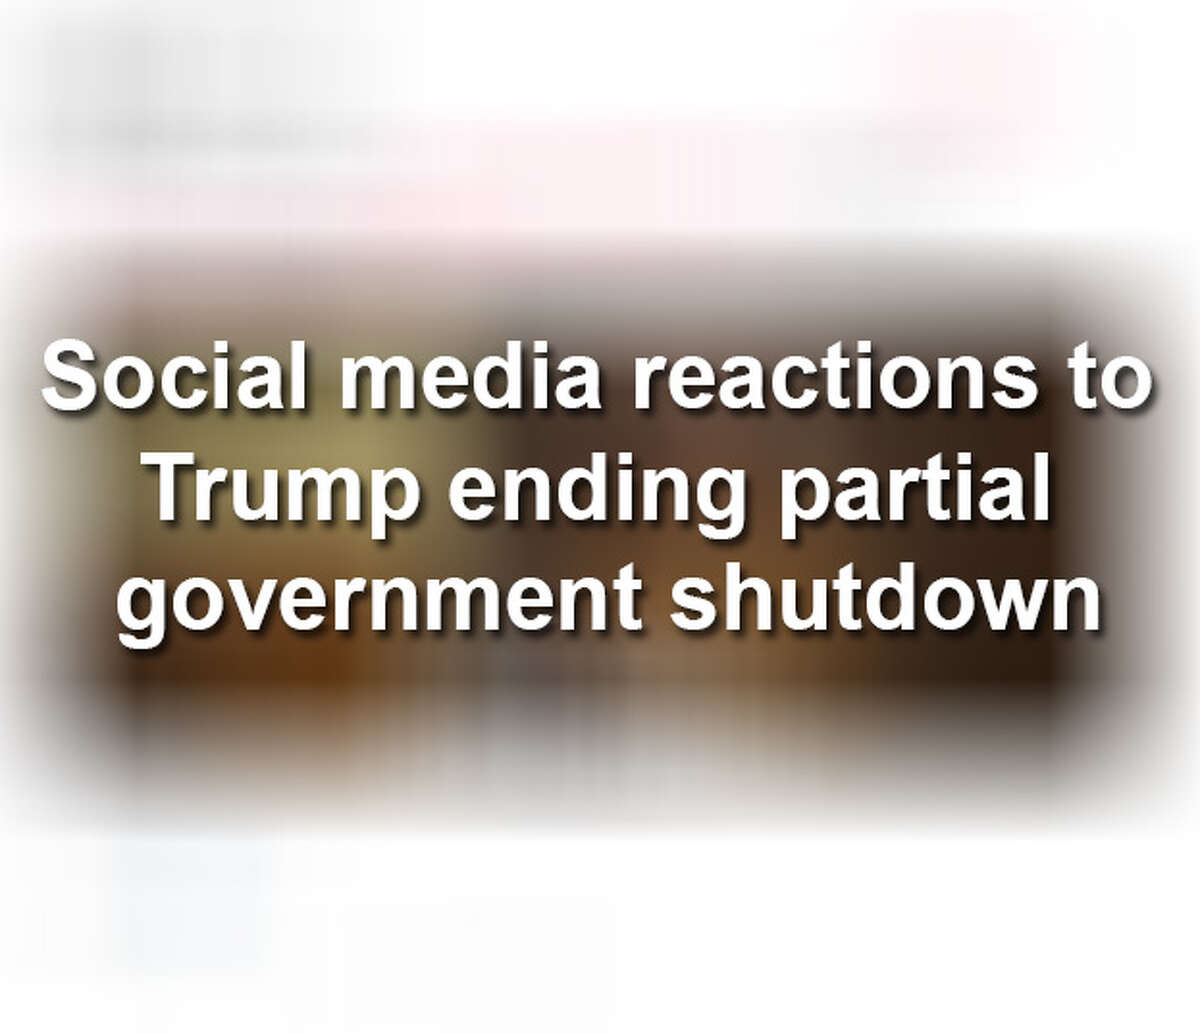 CLICK THROUGH THE SLIDESHOW FOR SOCIAL MEDIA REACTIONS TO THE END OF THE GOVERNMENT SHUTDOWN.